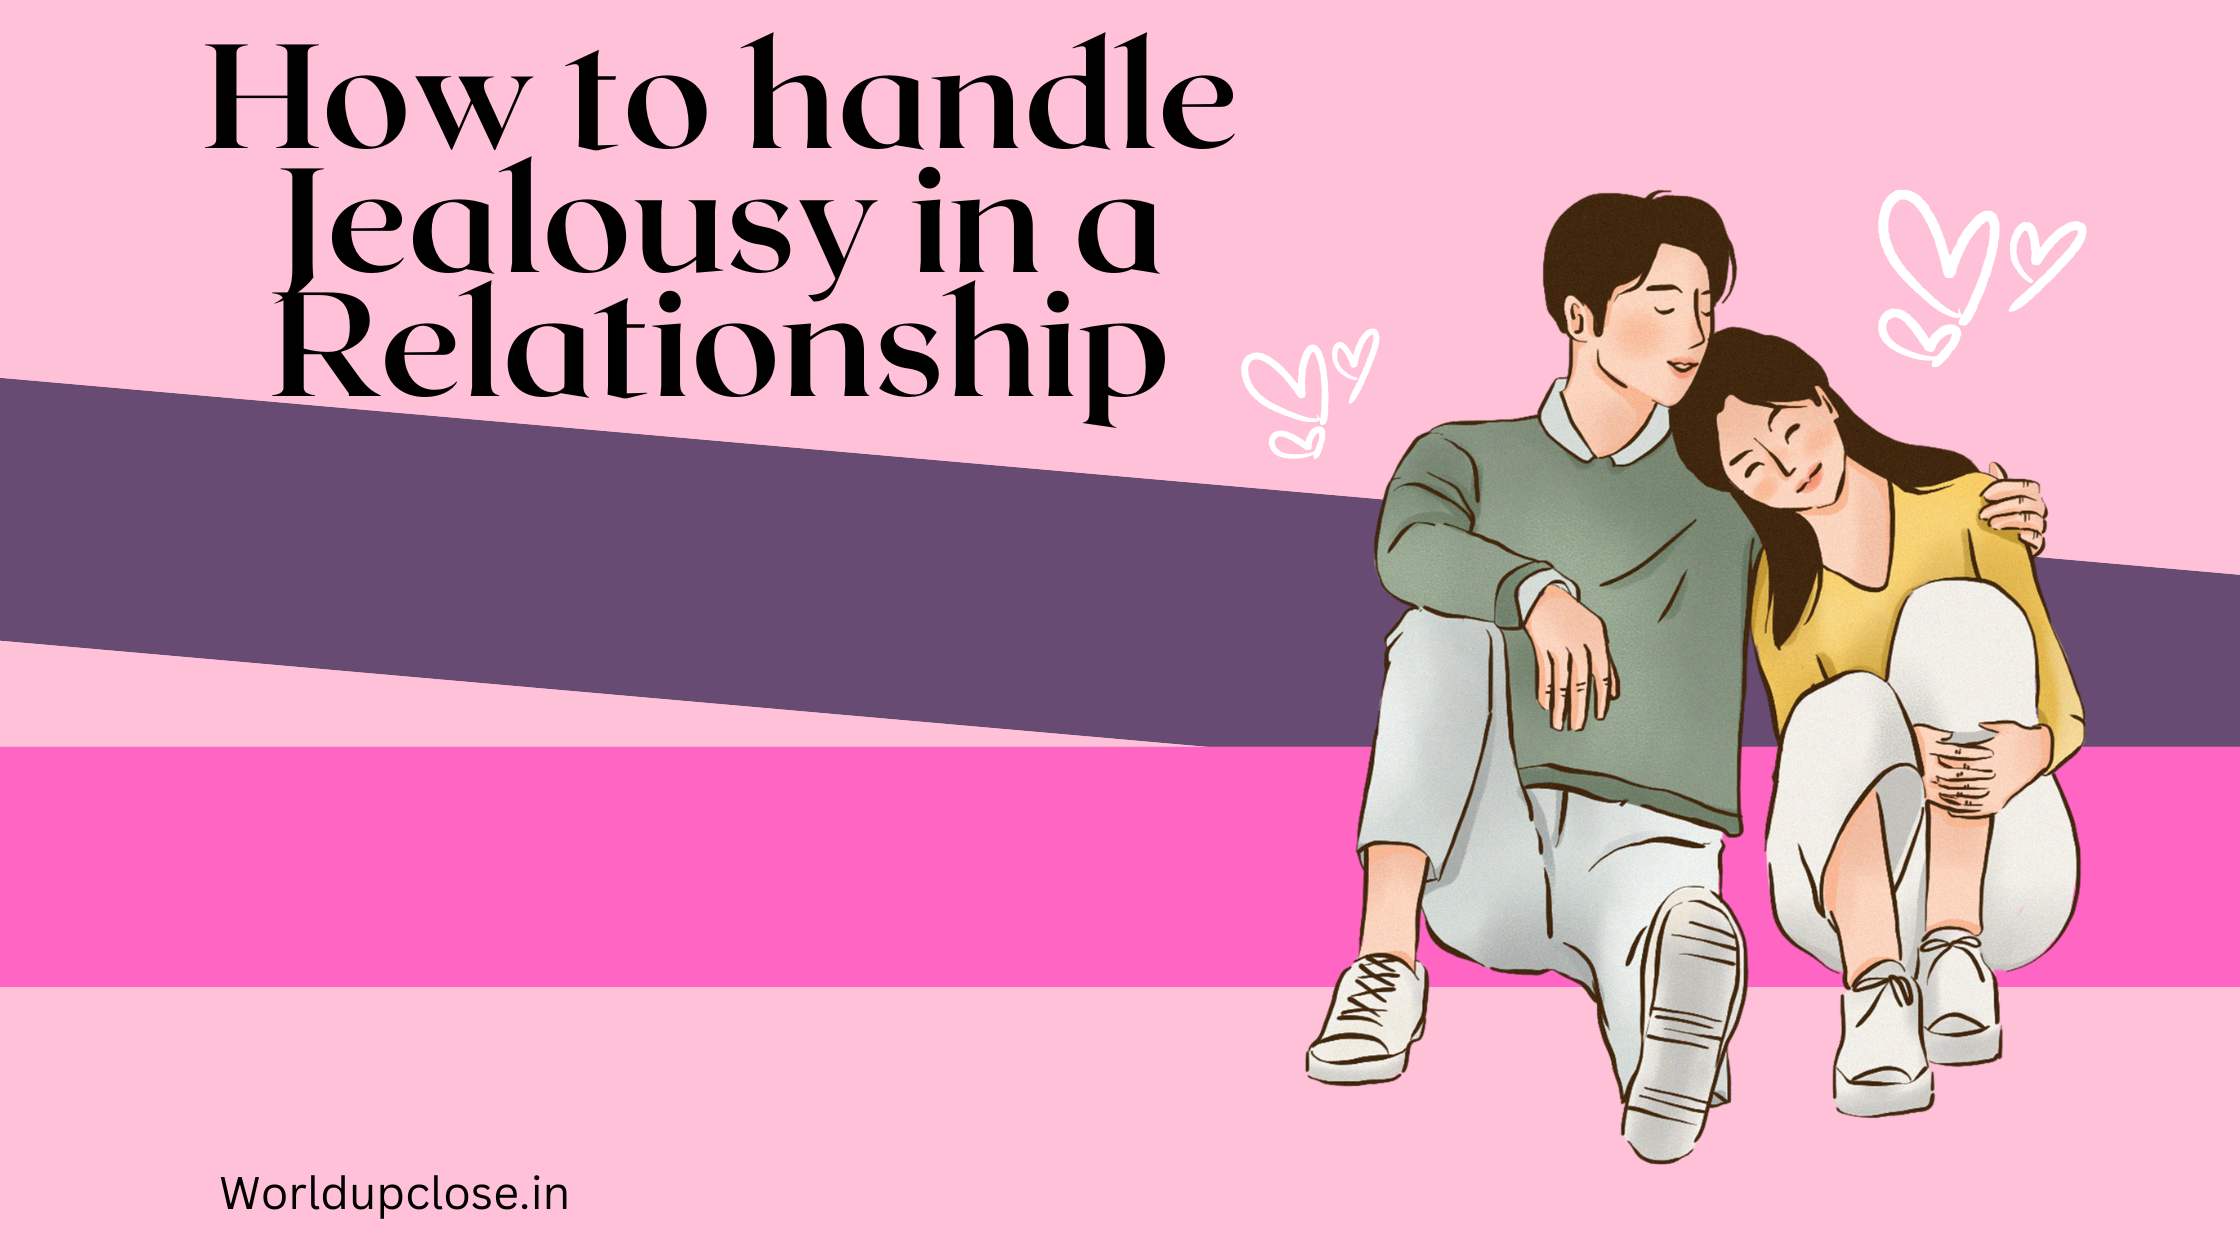 How to handle jealousy in a relationship: 9 Best Expert Tips 2